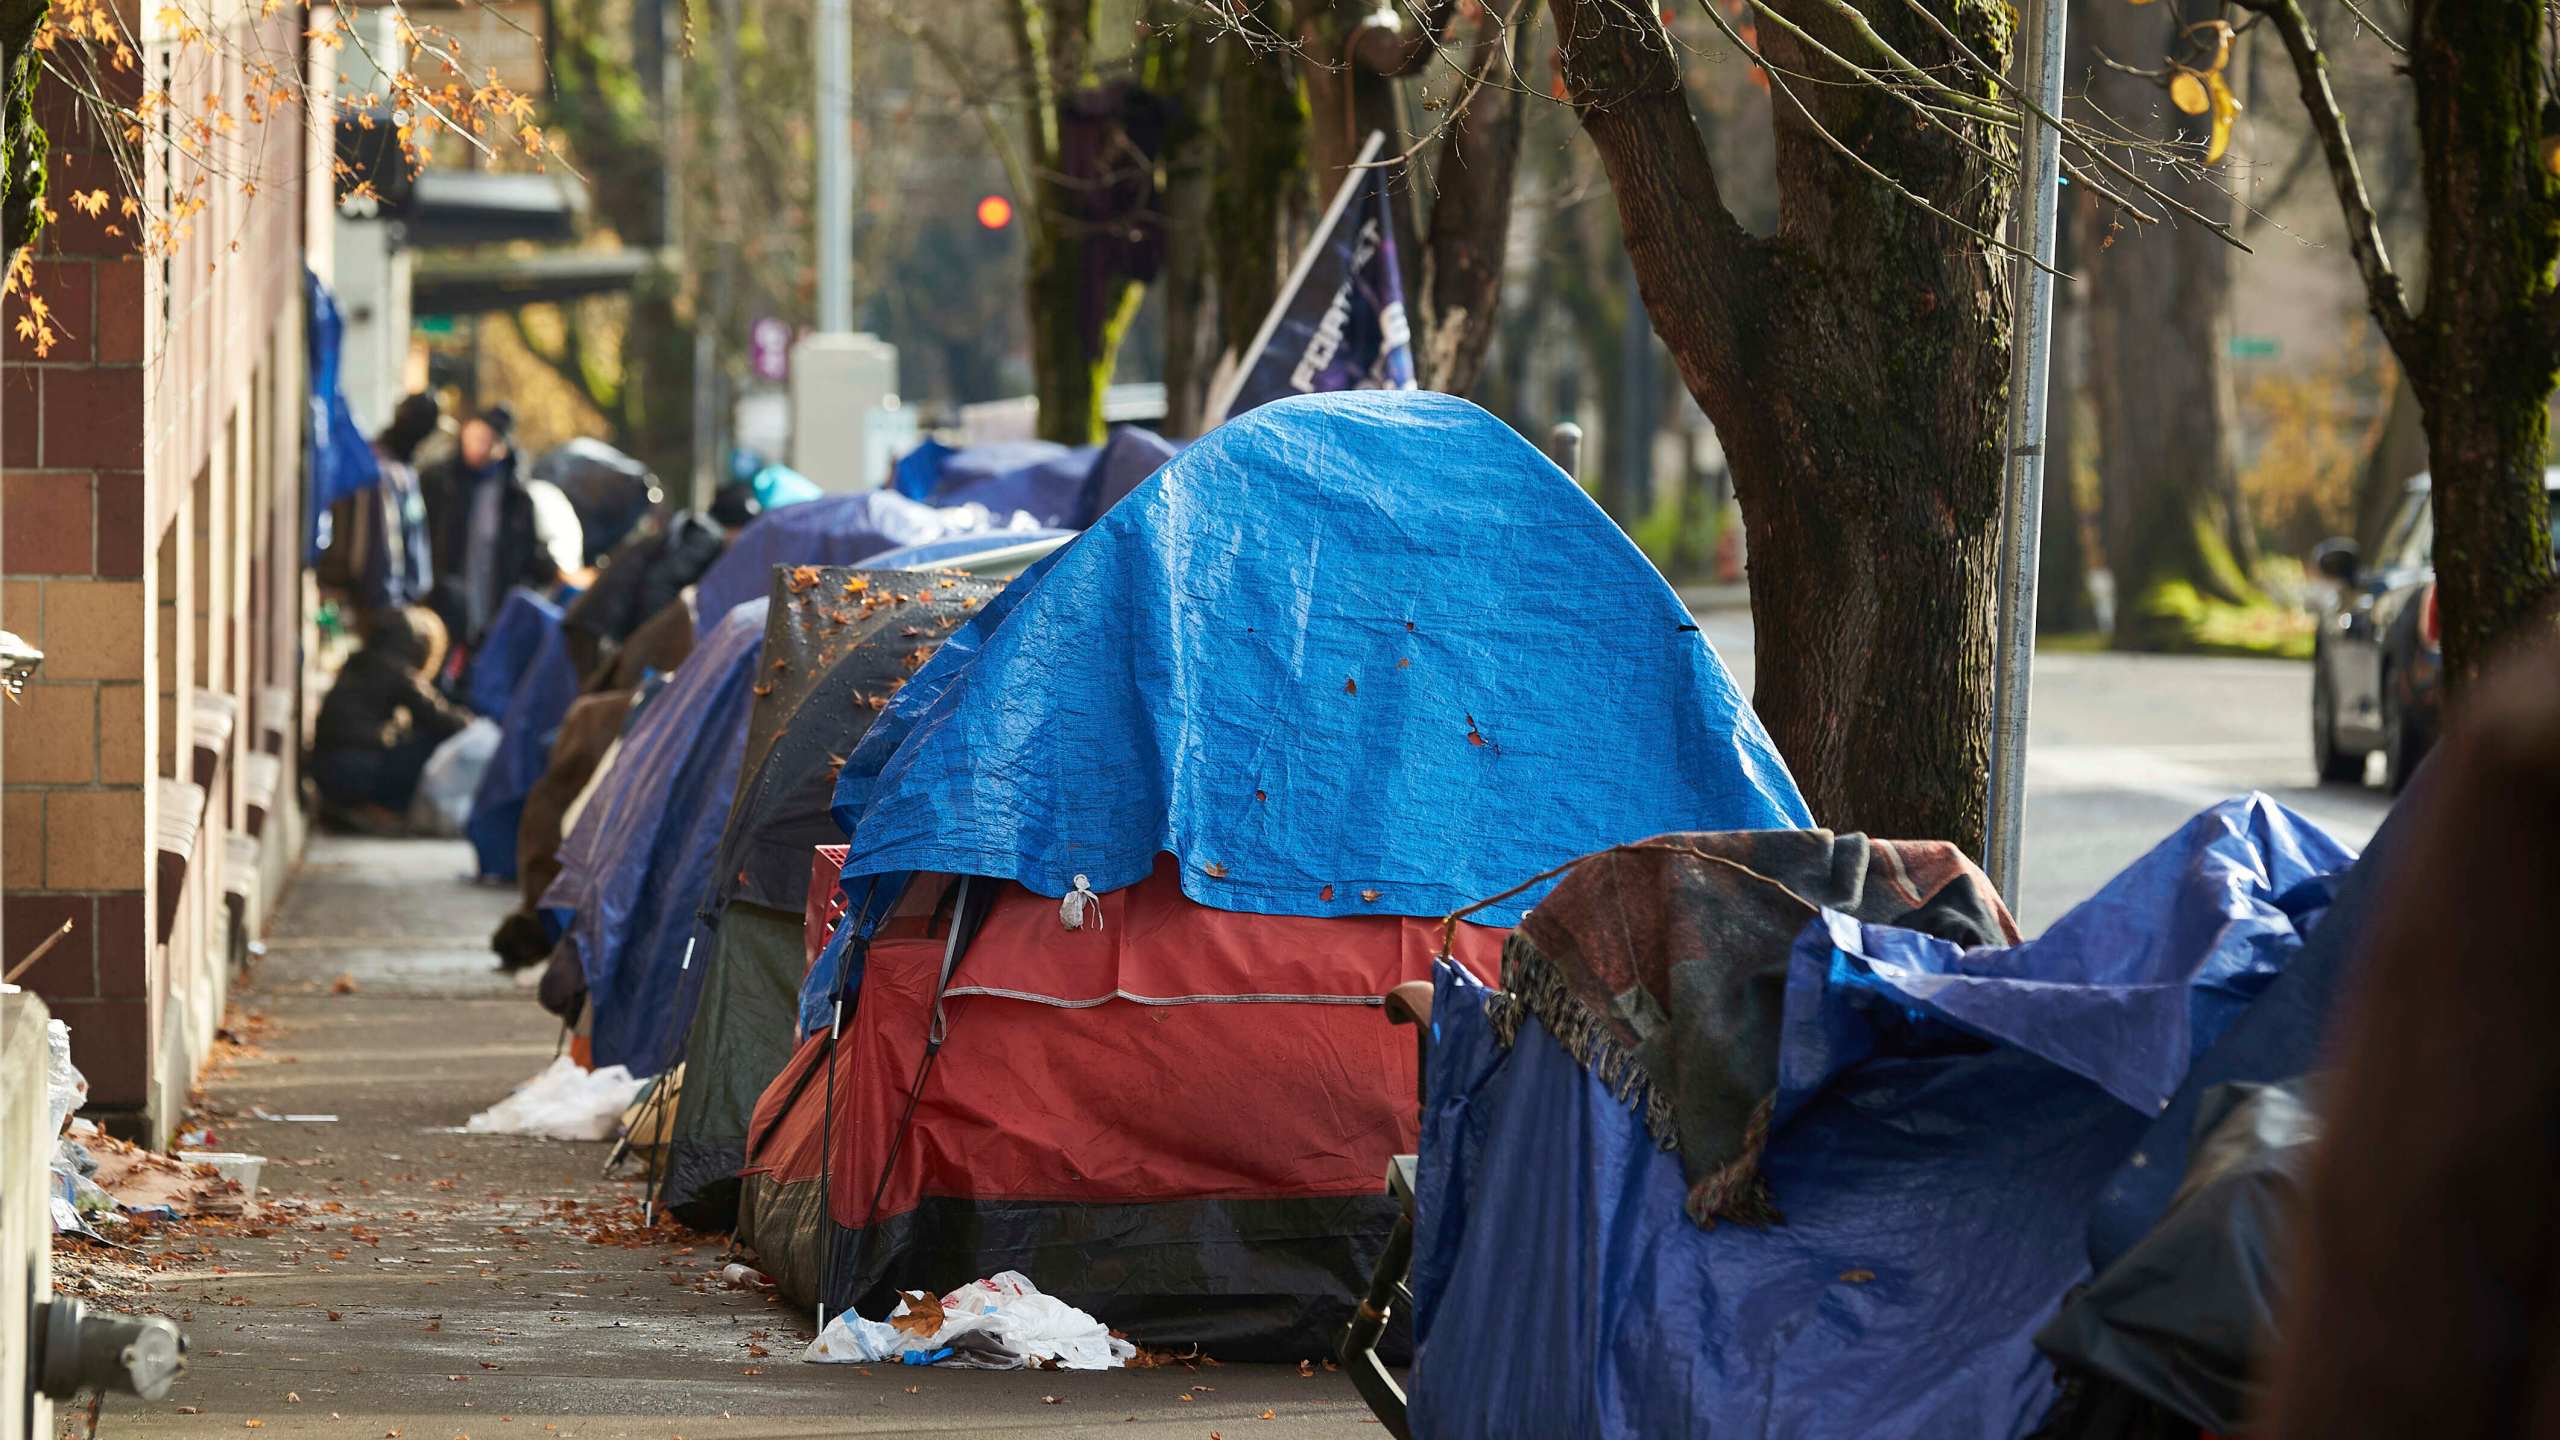 FILE - Tents line the sidewalk on Clay Street, Dec. 9, 2020, in Portland, Ore. Momentum is building in a case regarding homeless encampments before the U.S. Supreme Court that could have major implications for cities as homelessness nationwide has reached record highs. (AP Photo/Craig Mitchelldyer, File)